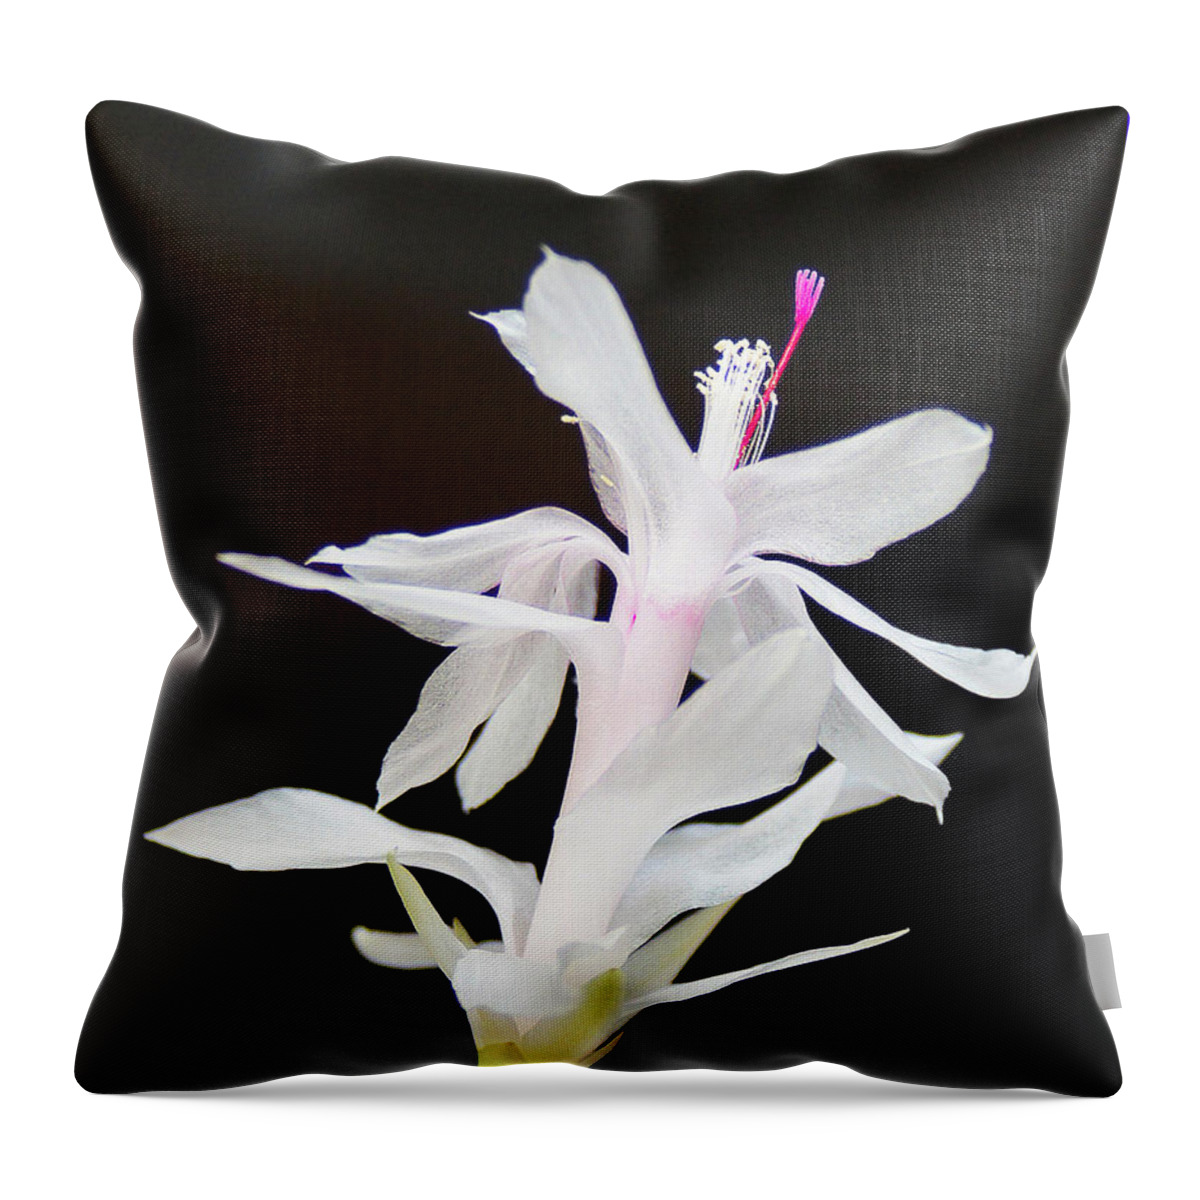 Photograph Throw Pillow featuring the photograph White Christmas Cactus by M Three Photos